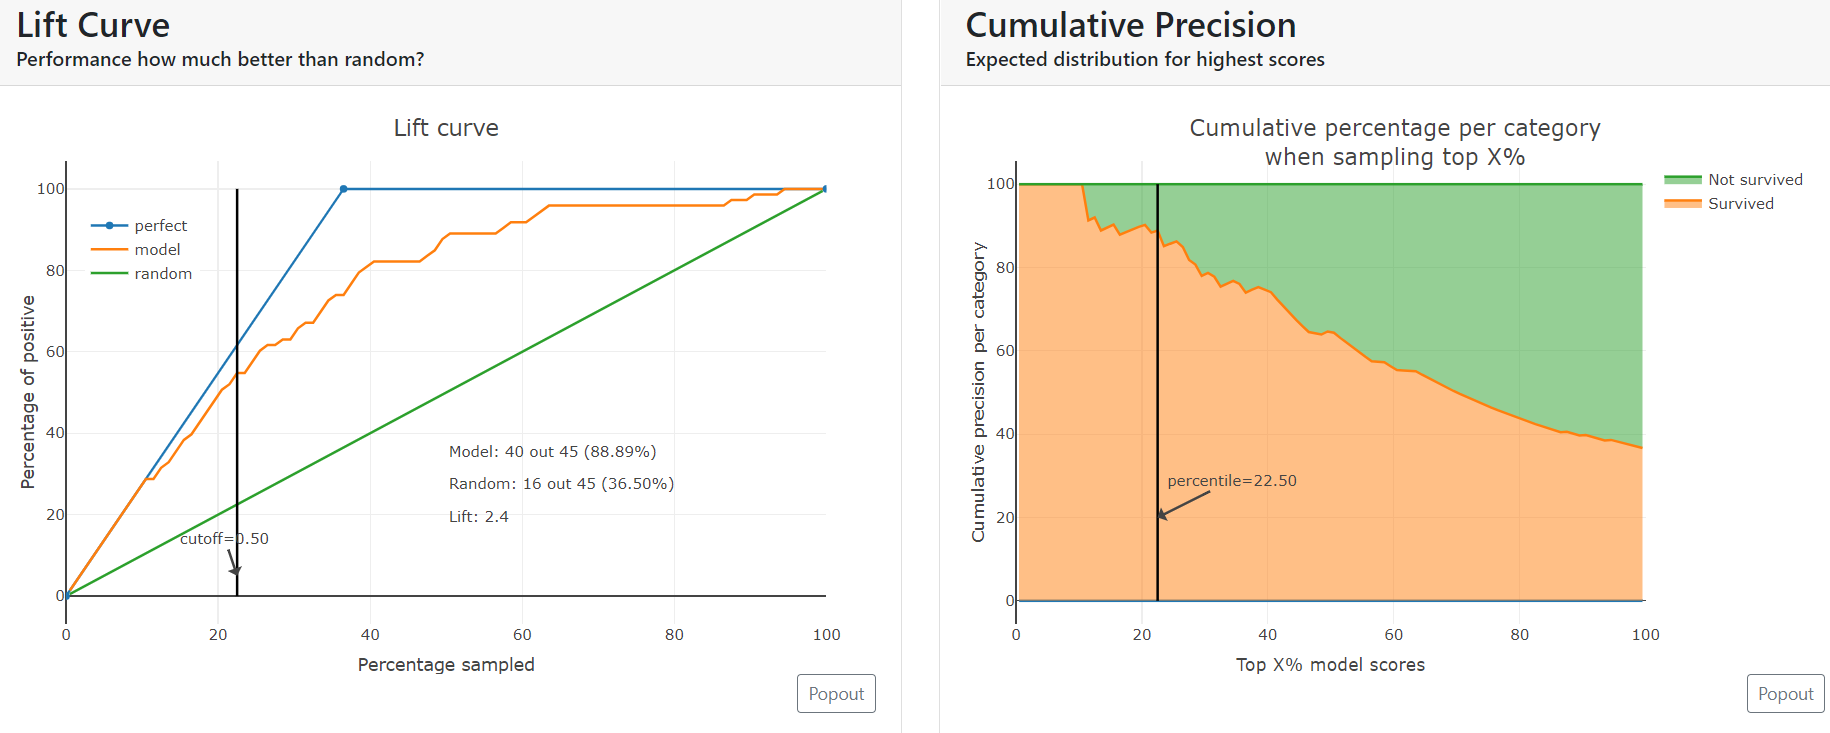 Lift curve and cumulative precision | Dashboards in Python